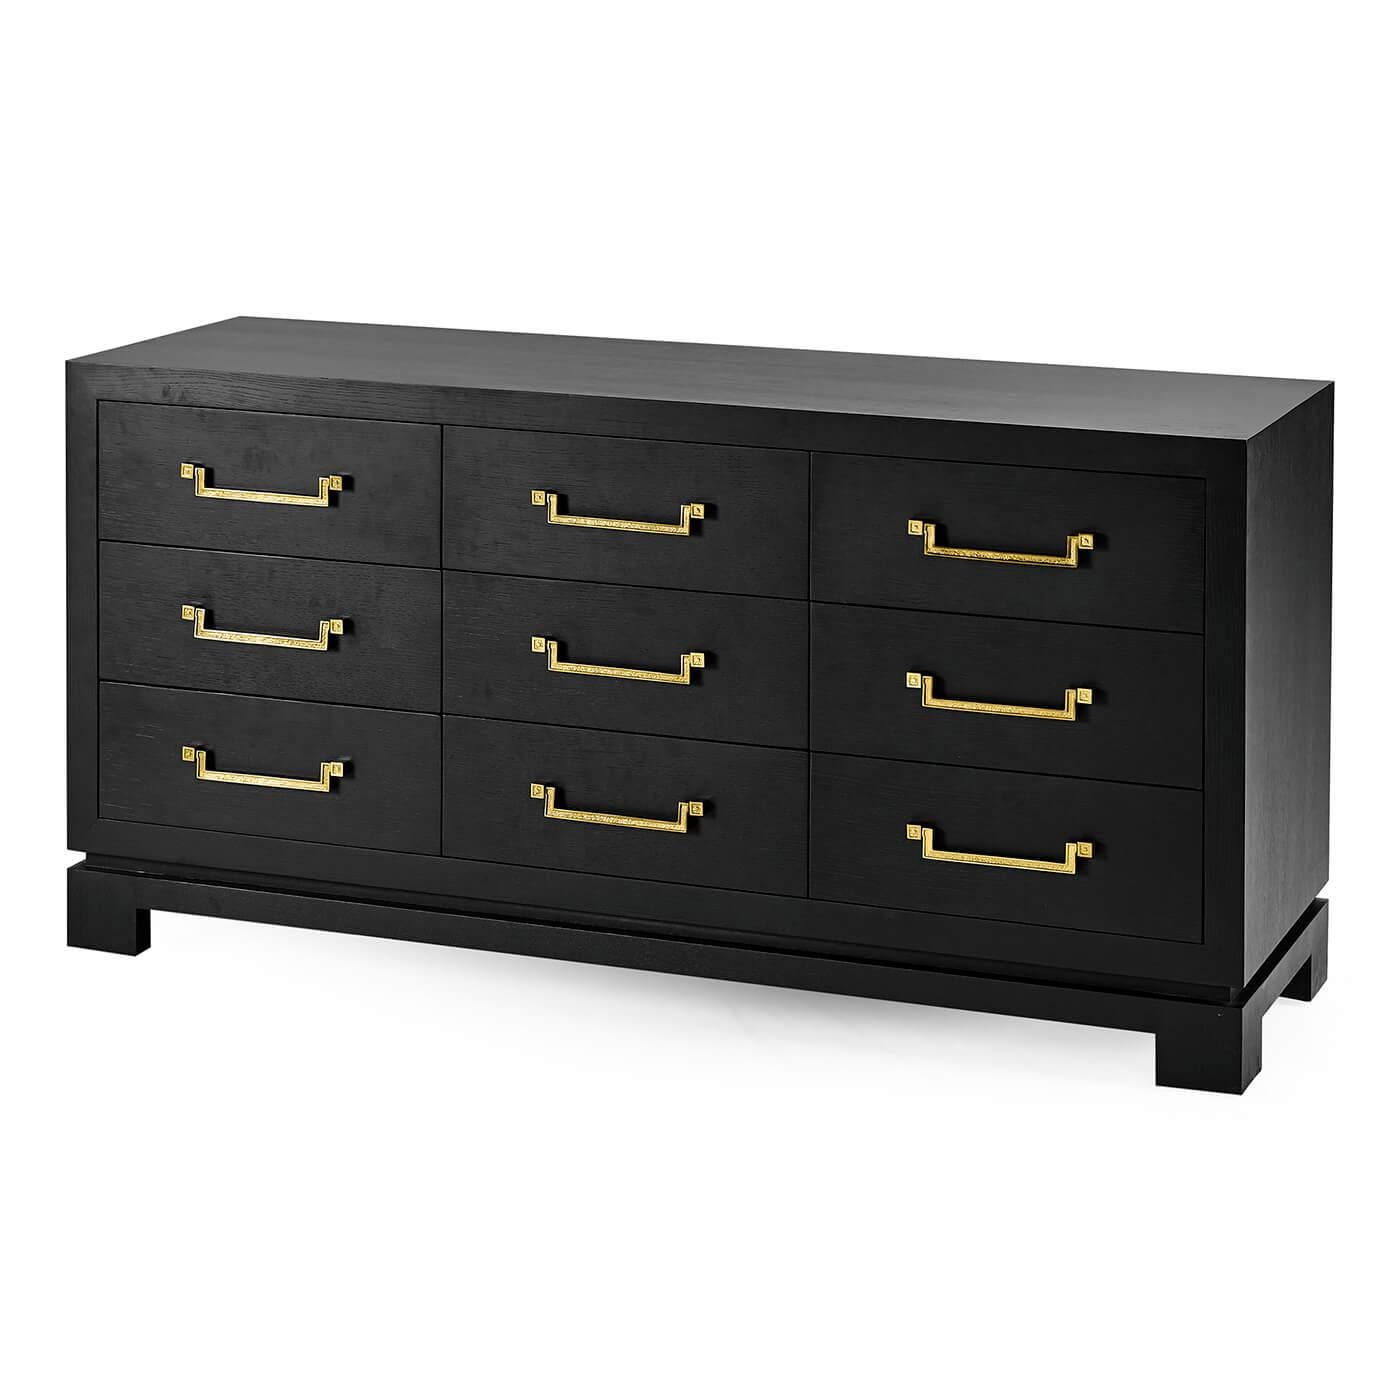 A Mid-Century Modern ebonized oak nine drawer dresser. Exquisite Chinese influence on the custom brass handles and base with three columns of drawers - this dresser has antique design and mid-century influences.

Dimensions: 65